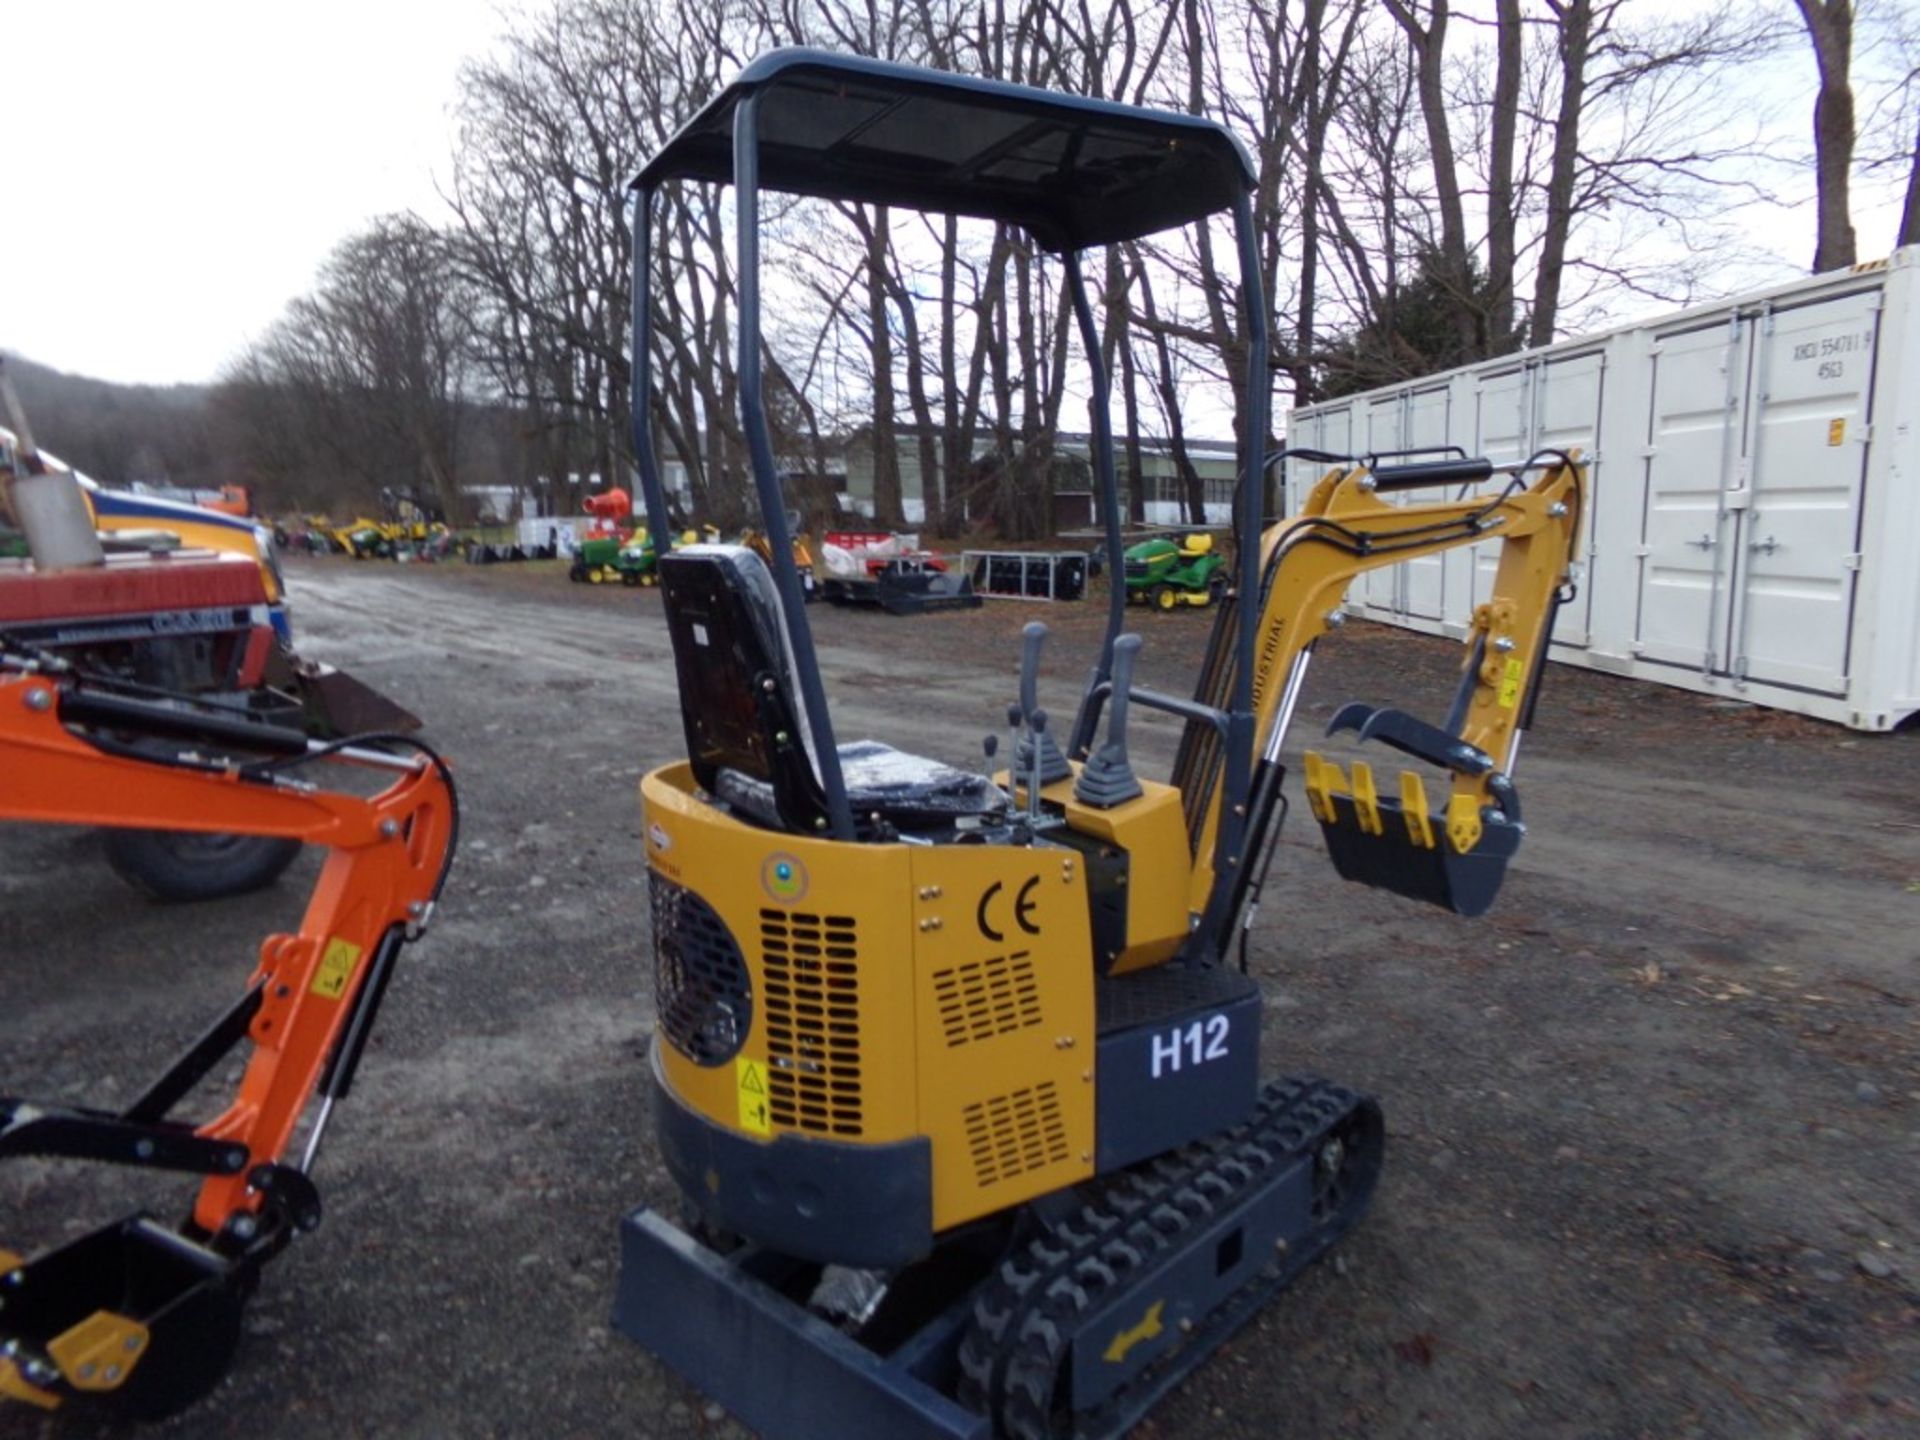 New AGT Industrial H12 Mini Excavator with Grader Blade, Stationary Thumb, Briggs Gas Engine, CAT - Image 3 of 8